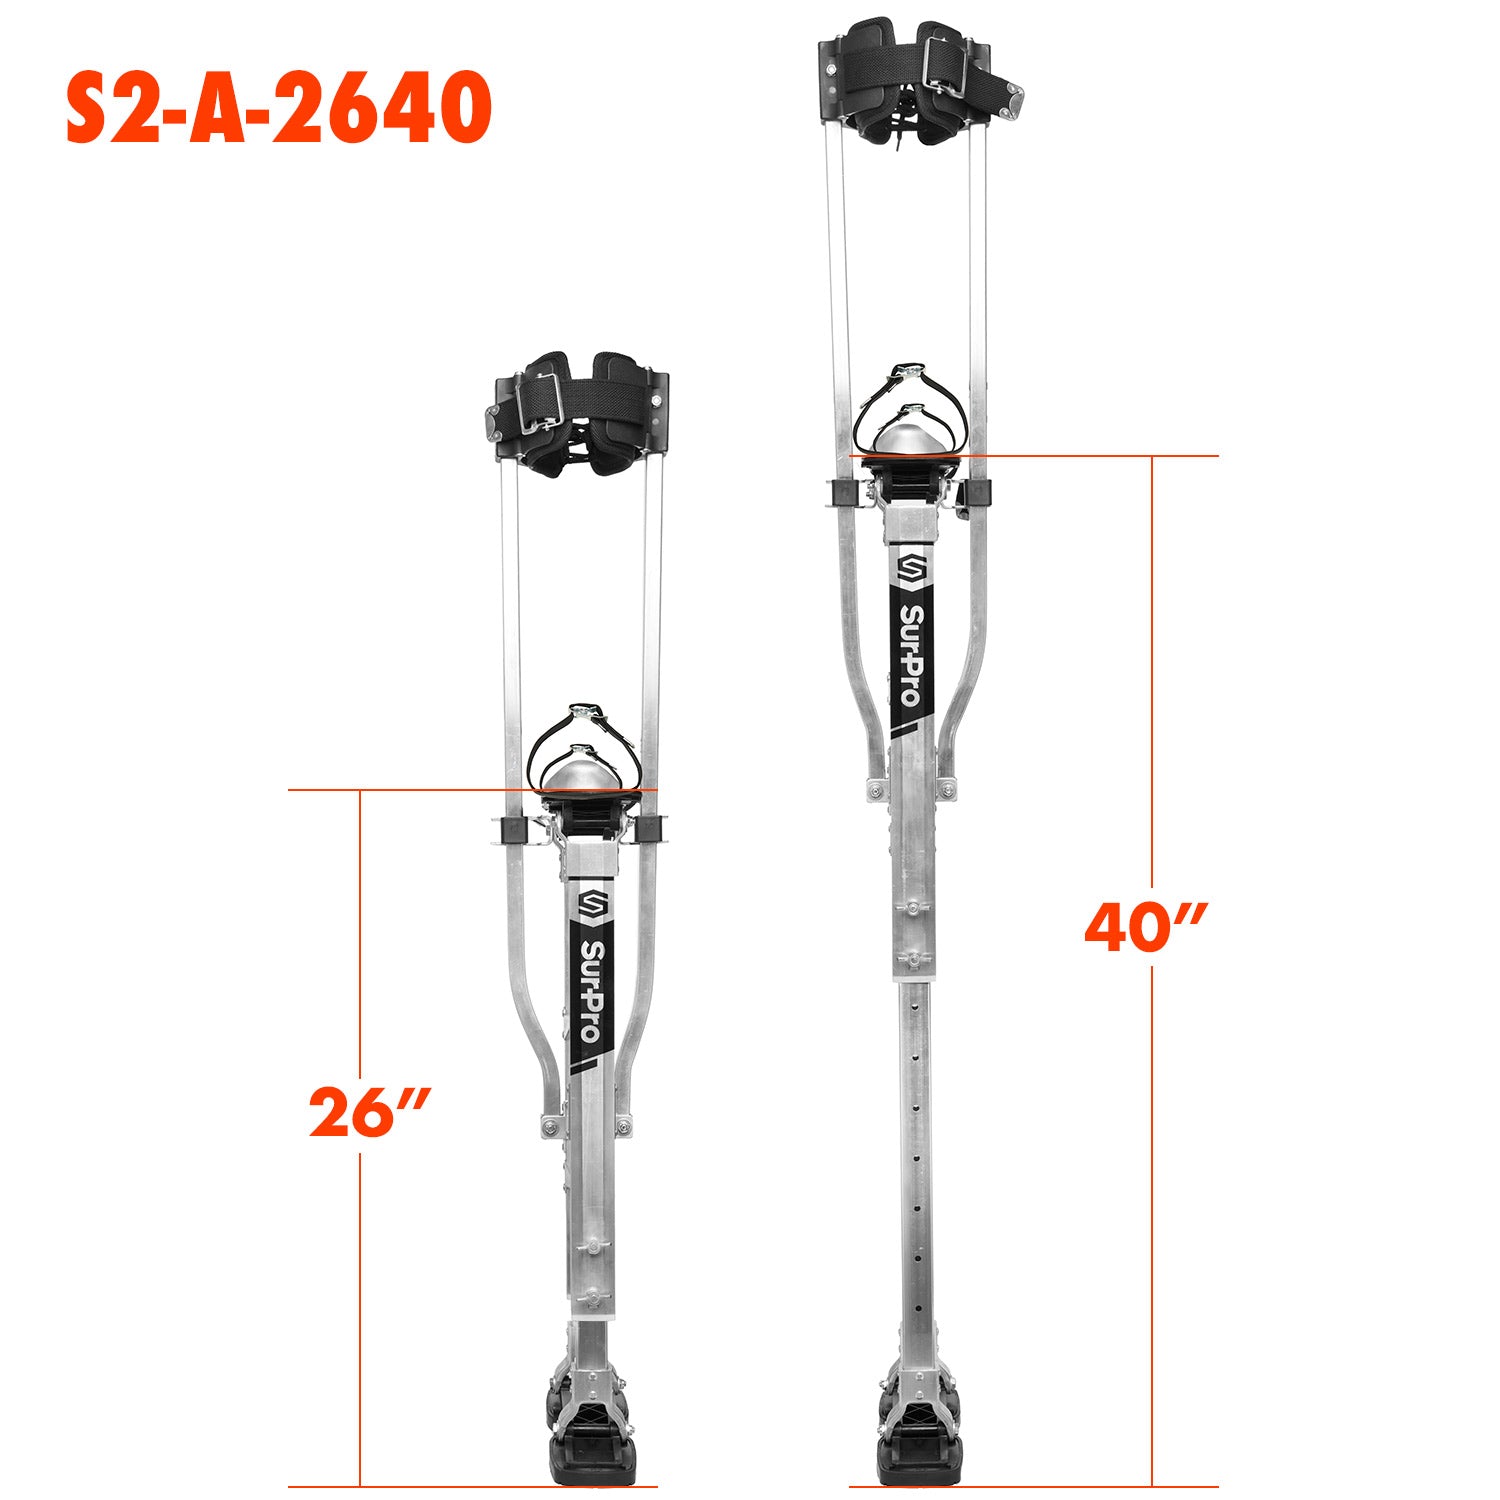 24"-40" stilts have been replaced by 26"-40" in stilts